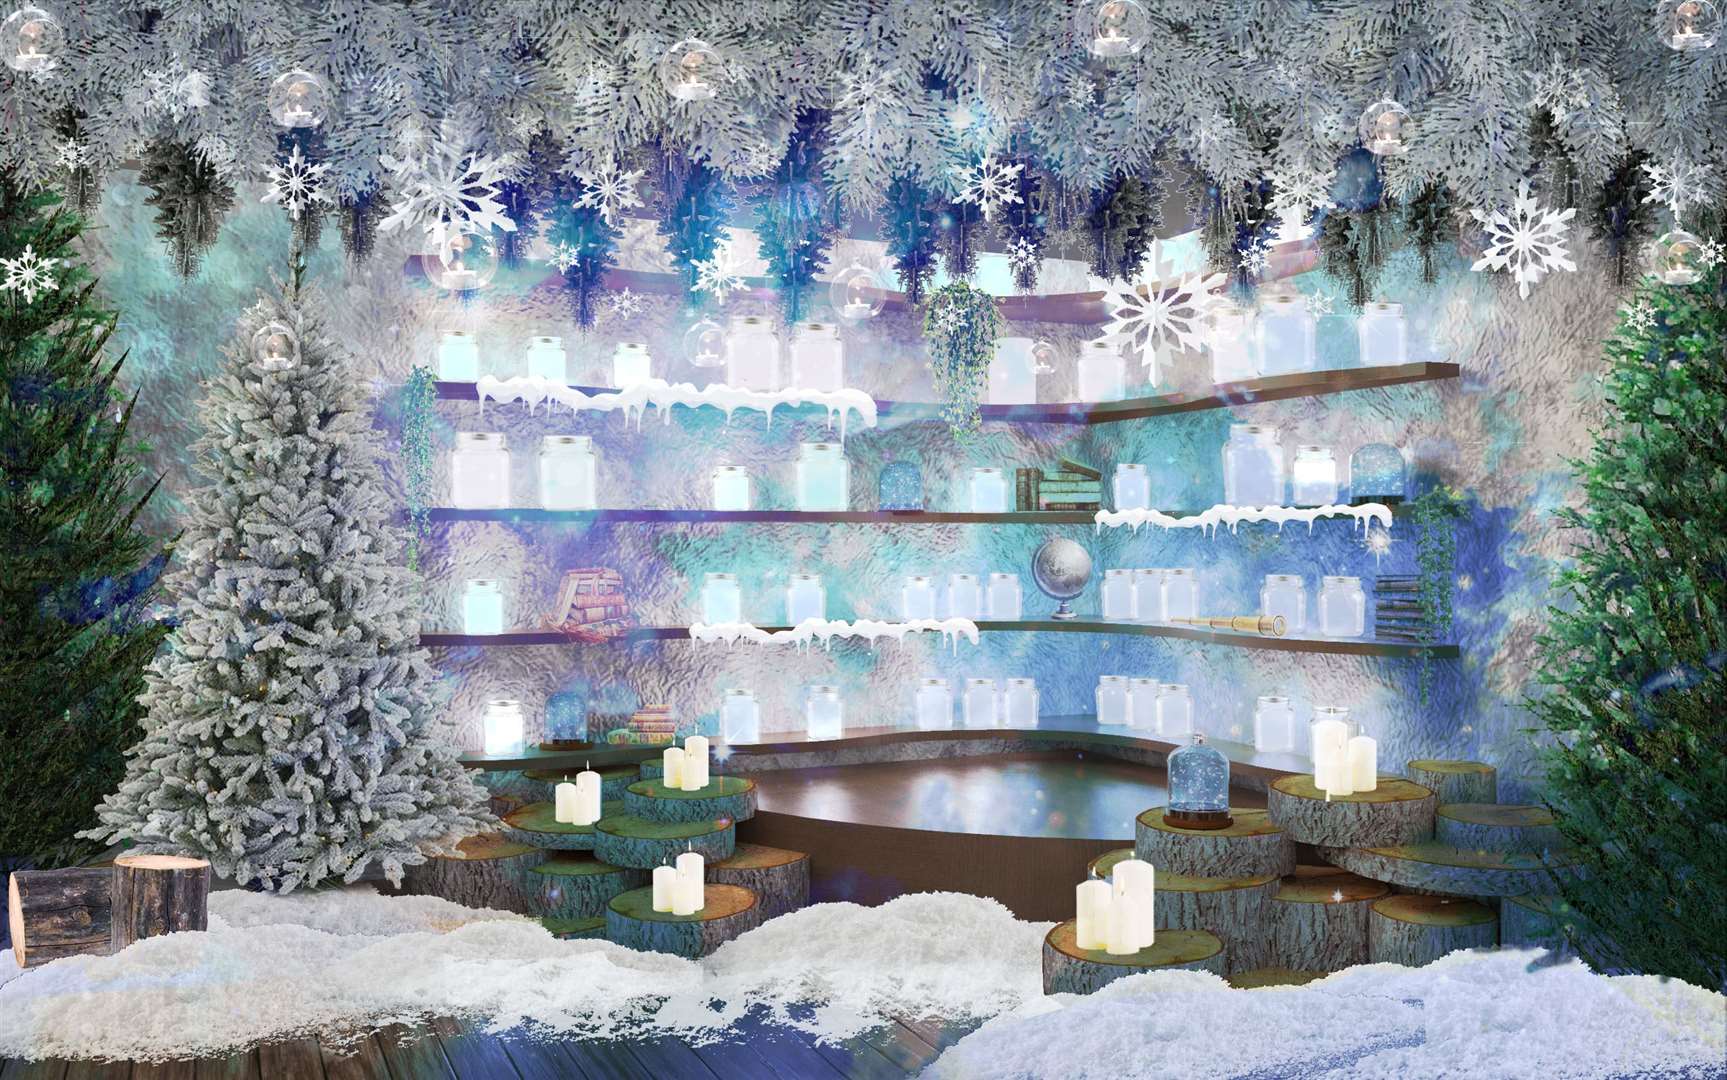 Bluewater's Belive Christmas launch 2020